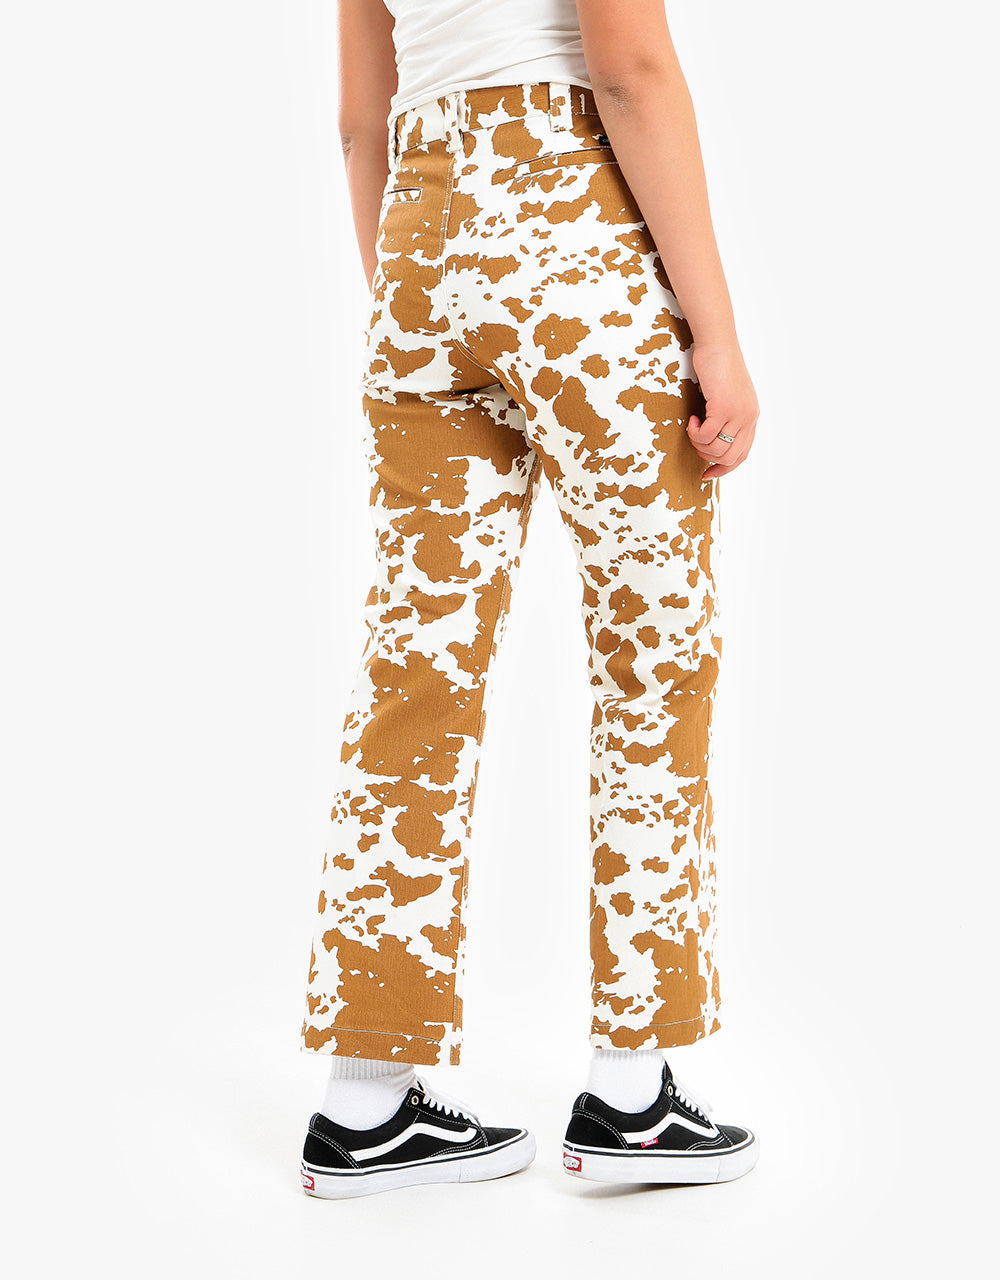 Obey Womens Straggler Printed Pant - Cow Print